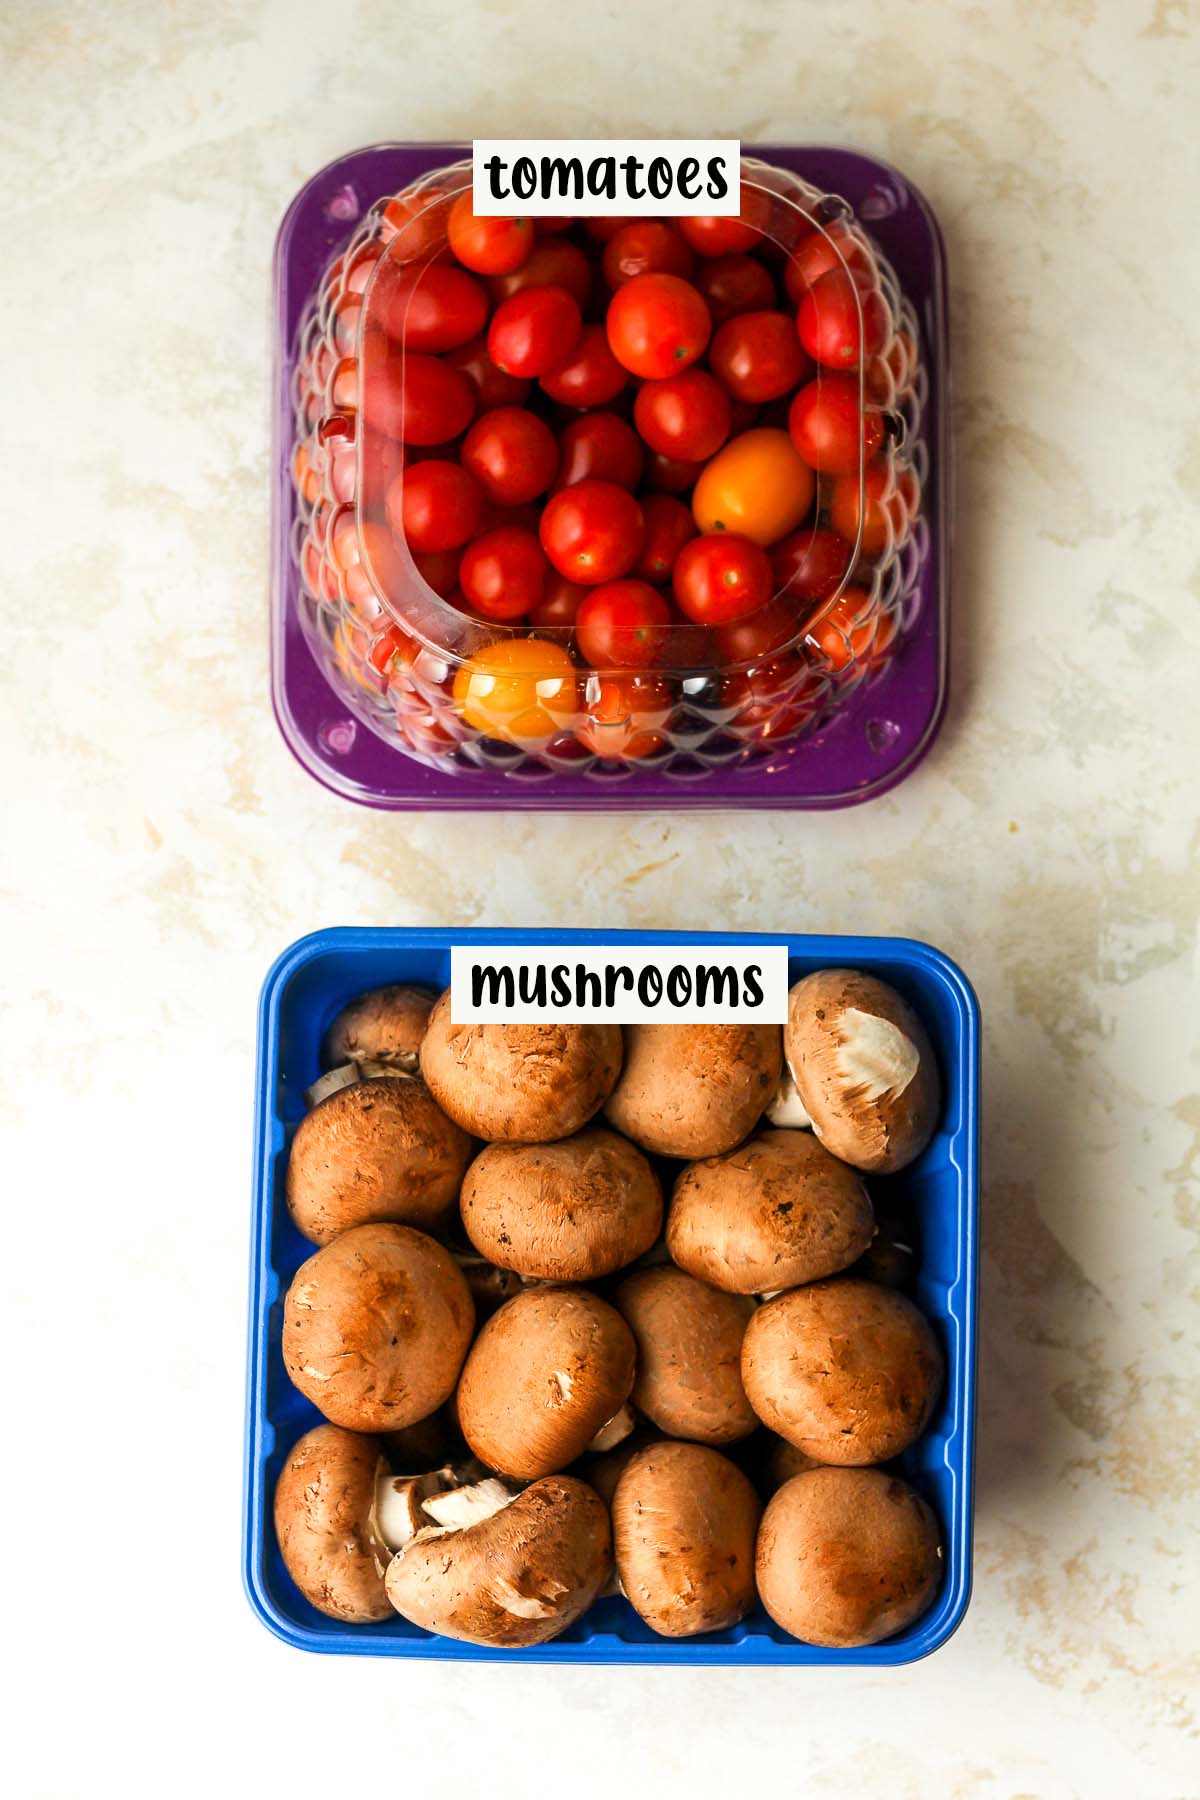 A container of tomatoes and mushrooms.